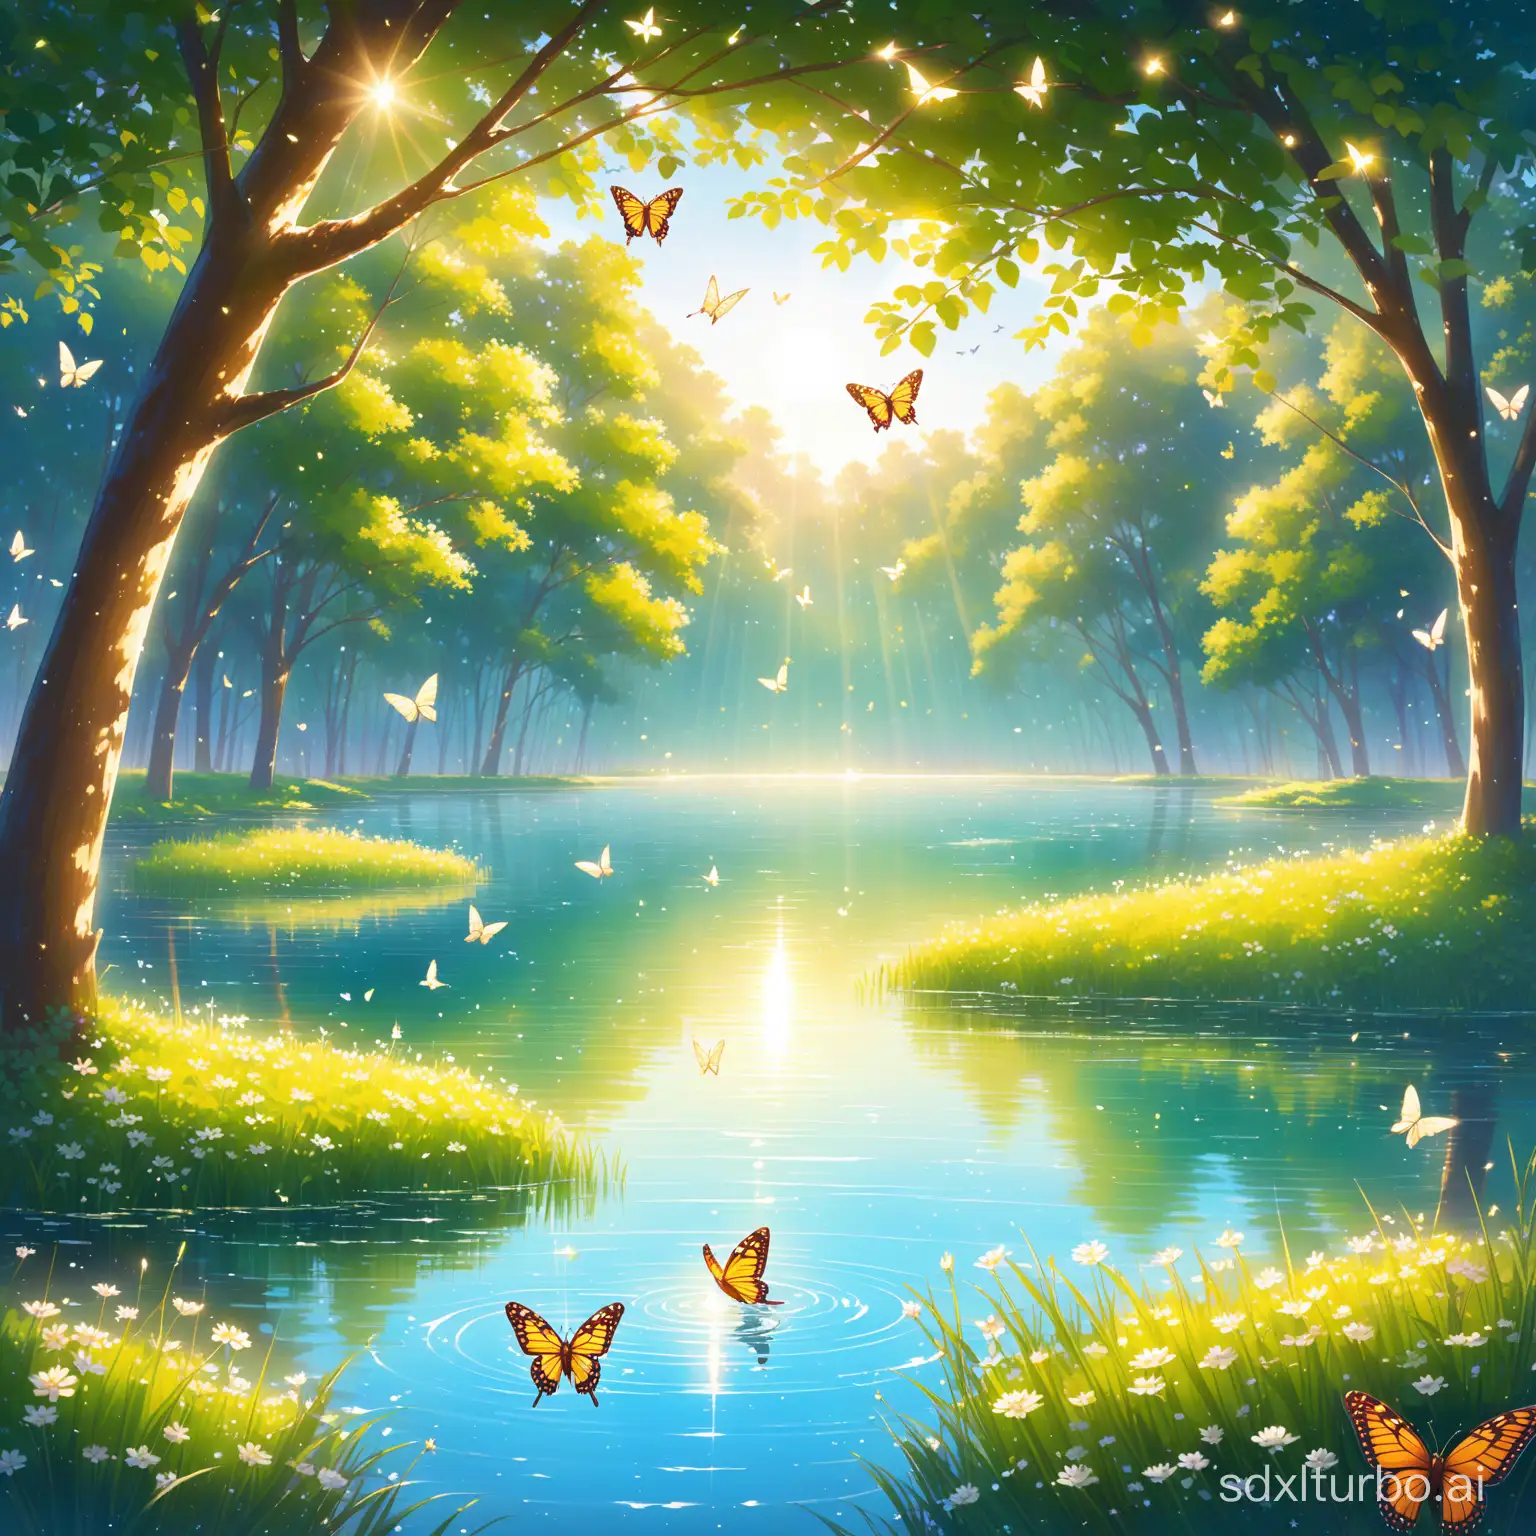 A tranquil lake, with sunlight sprinkling on the water's surface, butterflies fluttering, and birds cheerfully singing in the trees.